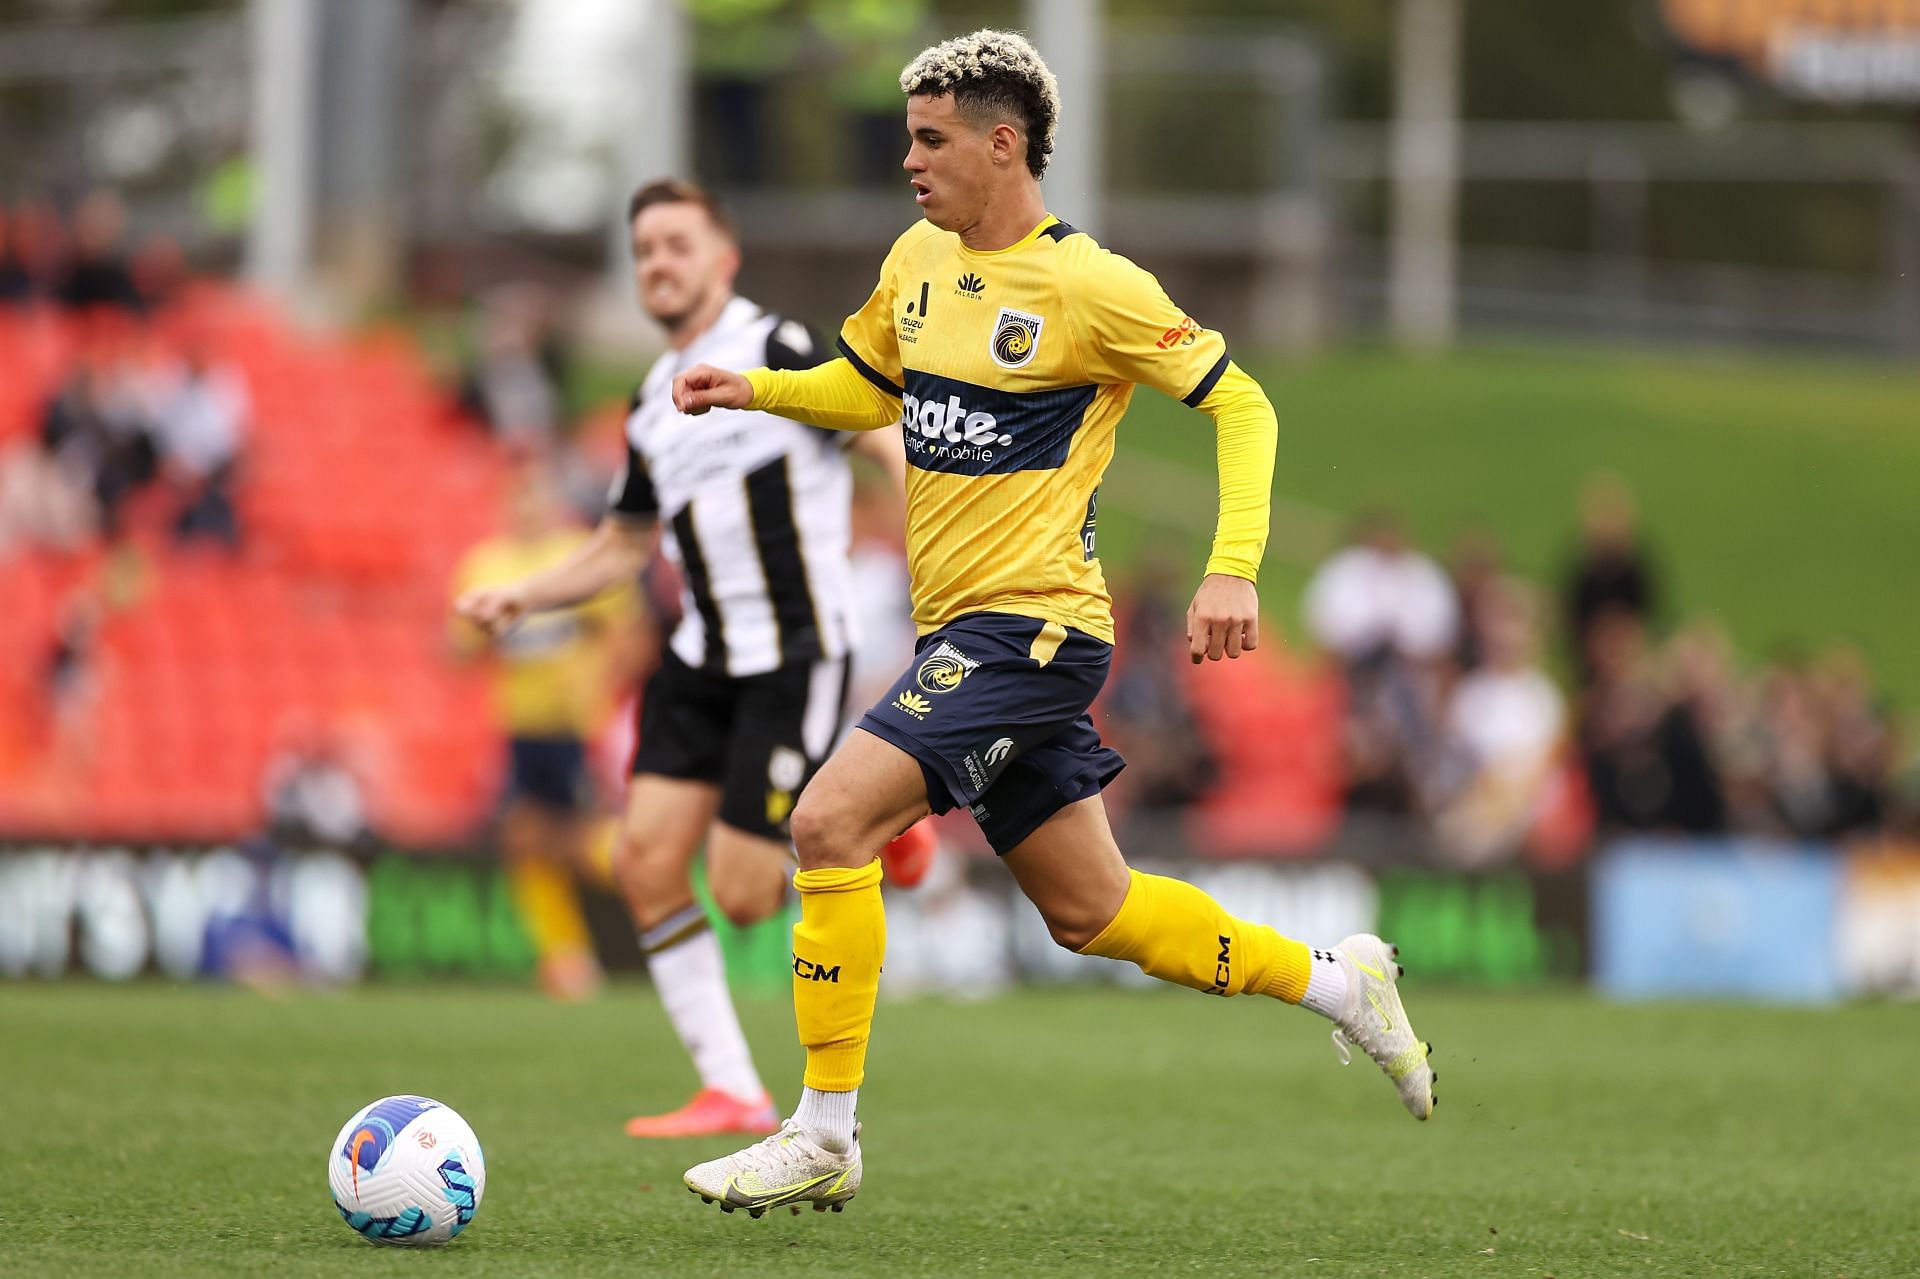 Central Coast Mariners take on Macarthur FC this week